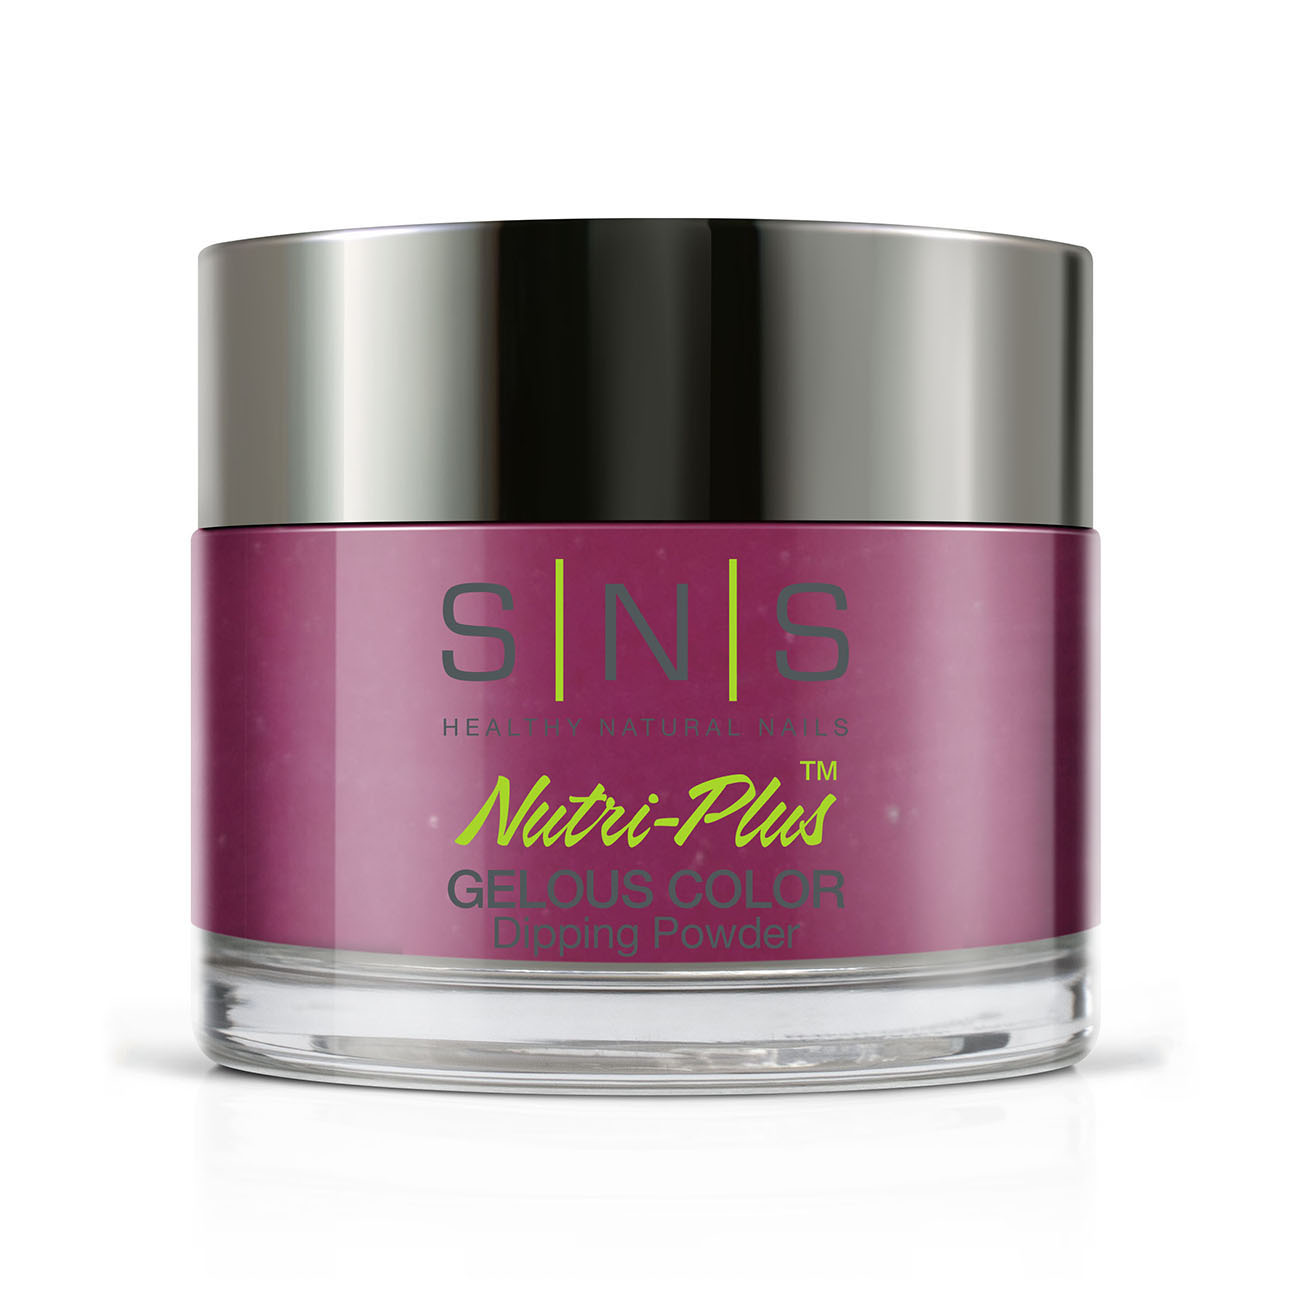 SNS Nails AC35 Forever Young 28g (1oz) | Gelous Dipping Powder